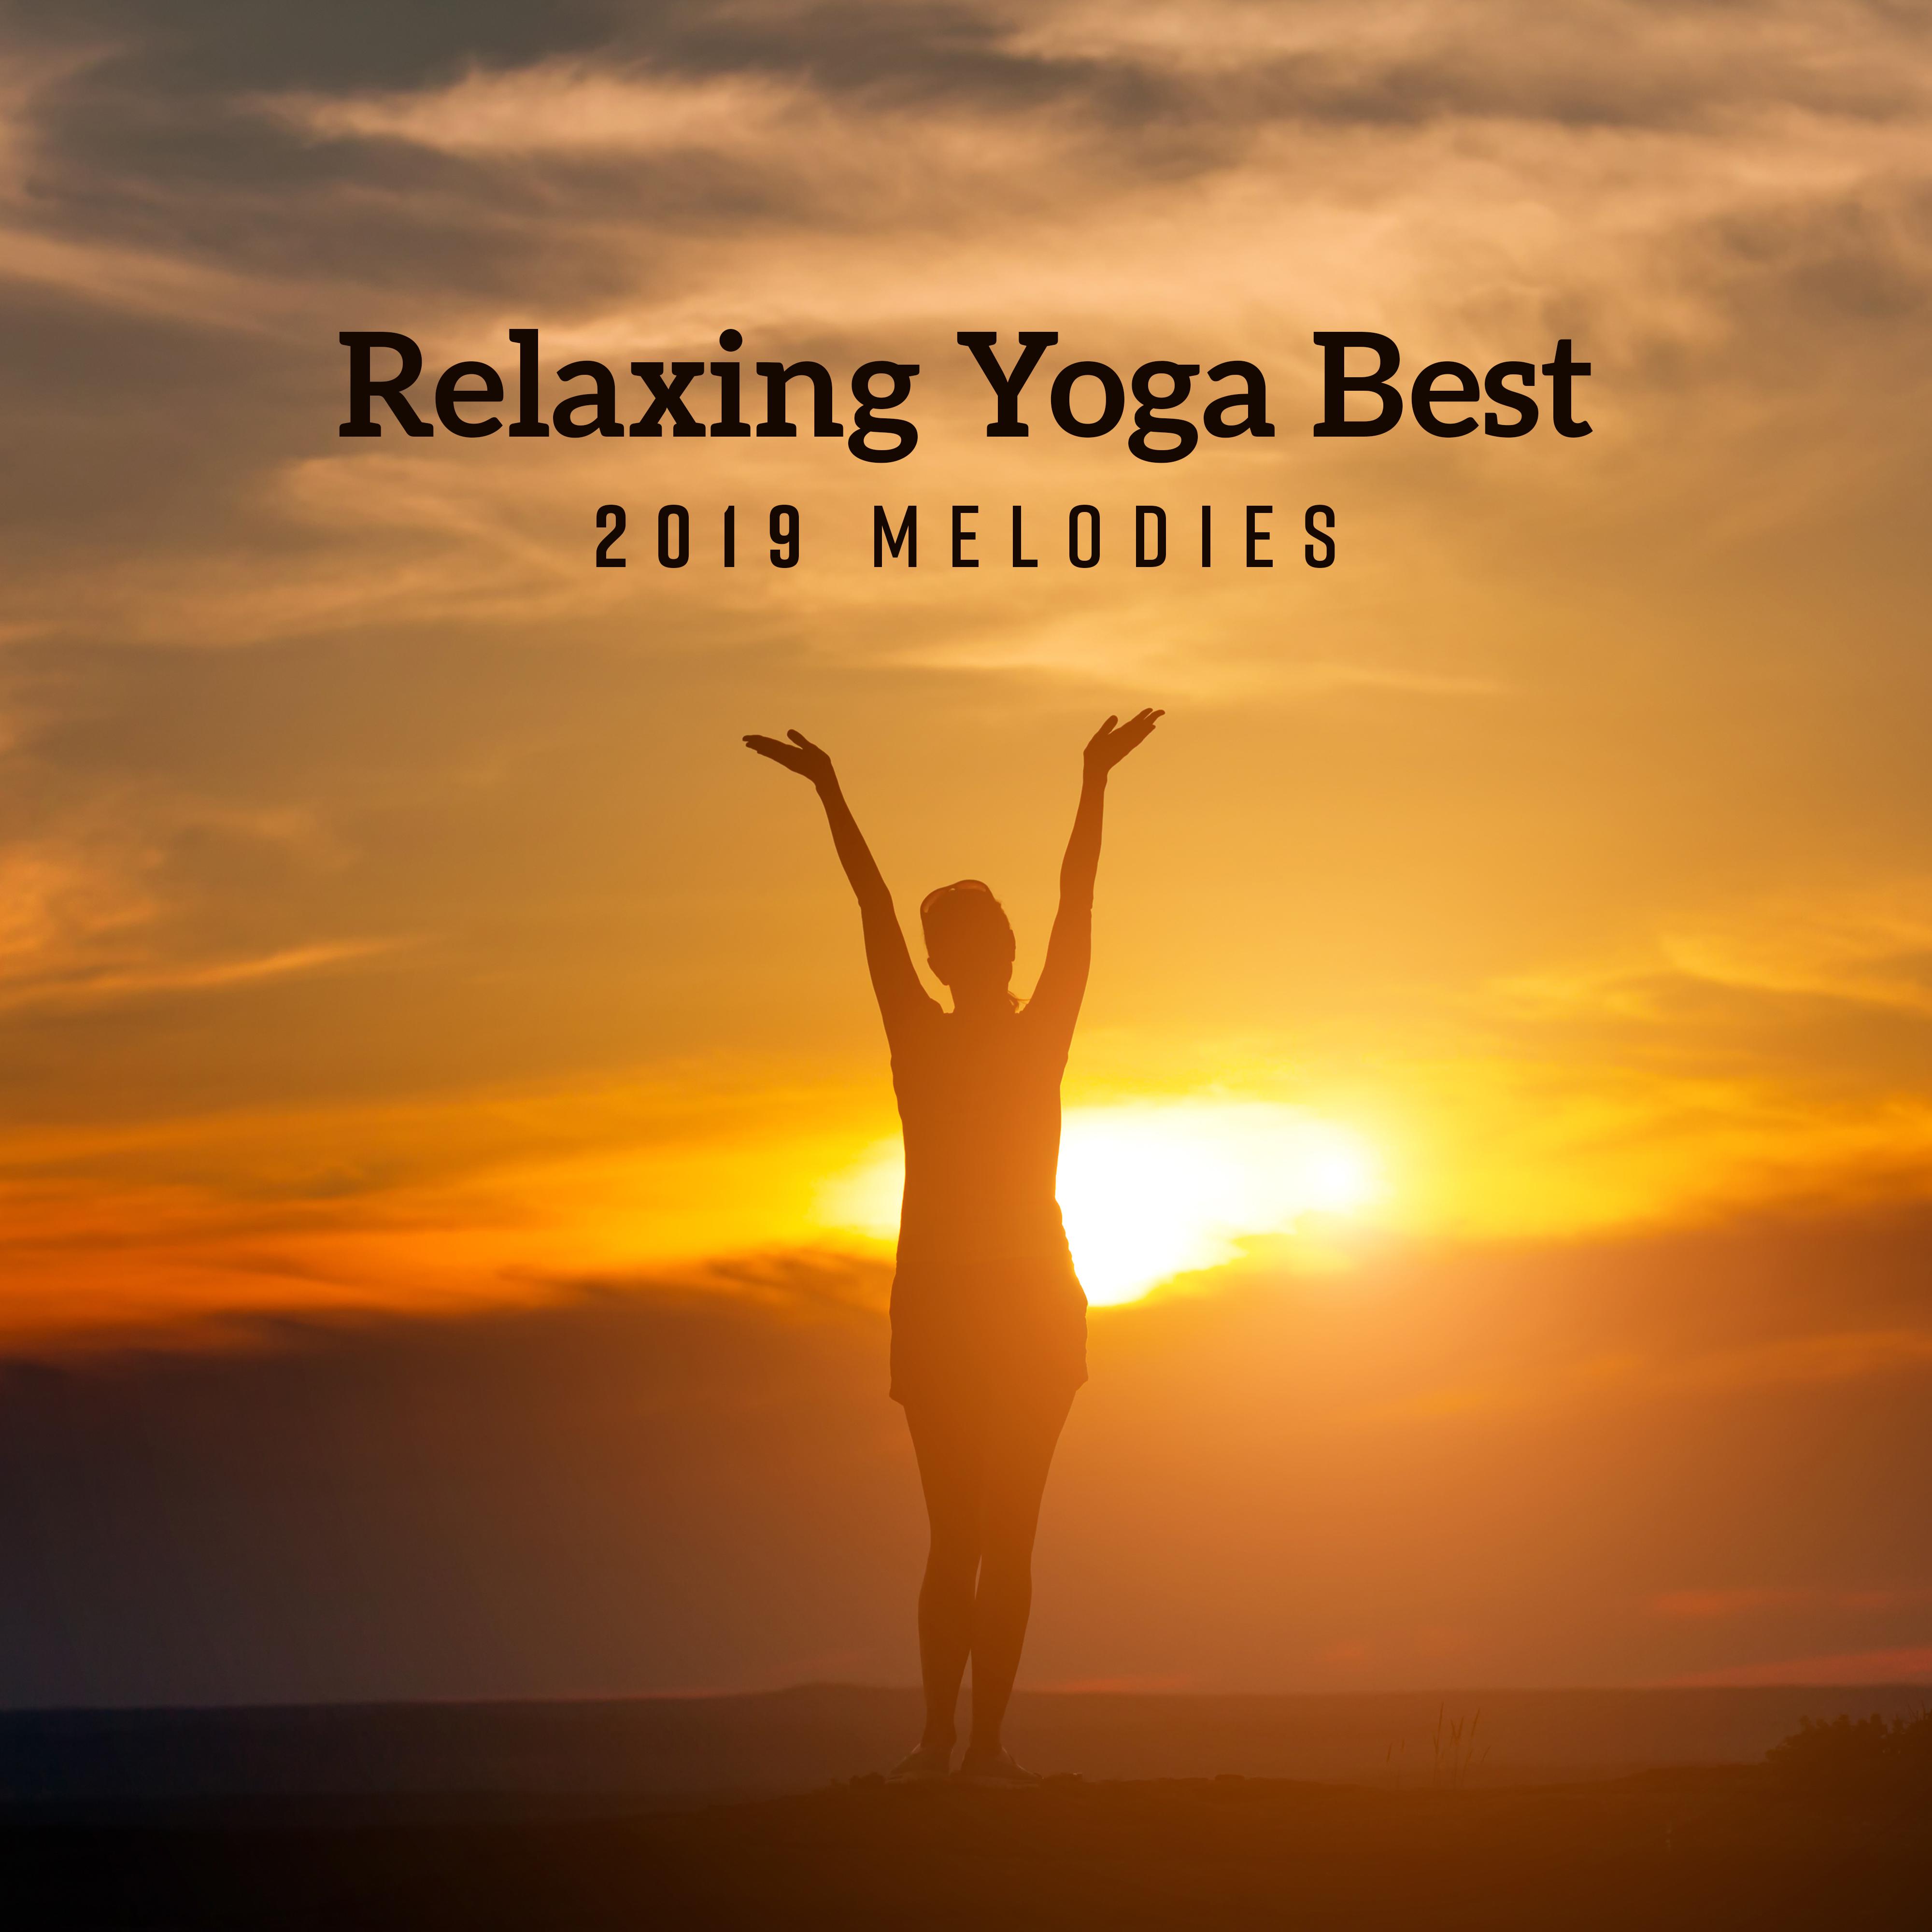 Relaxing Yoga Best 2019 Melodies